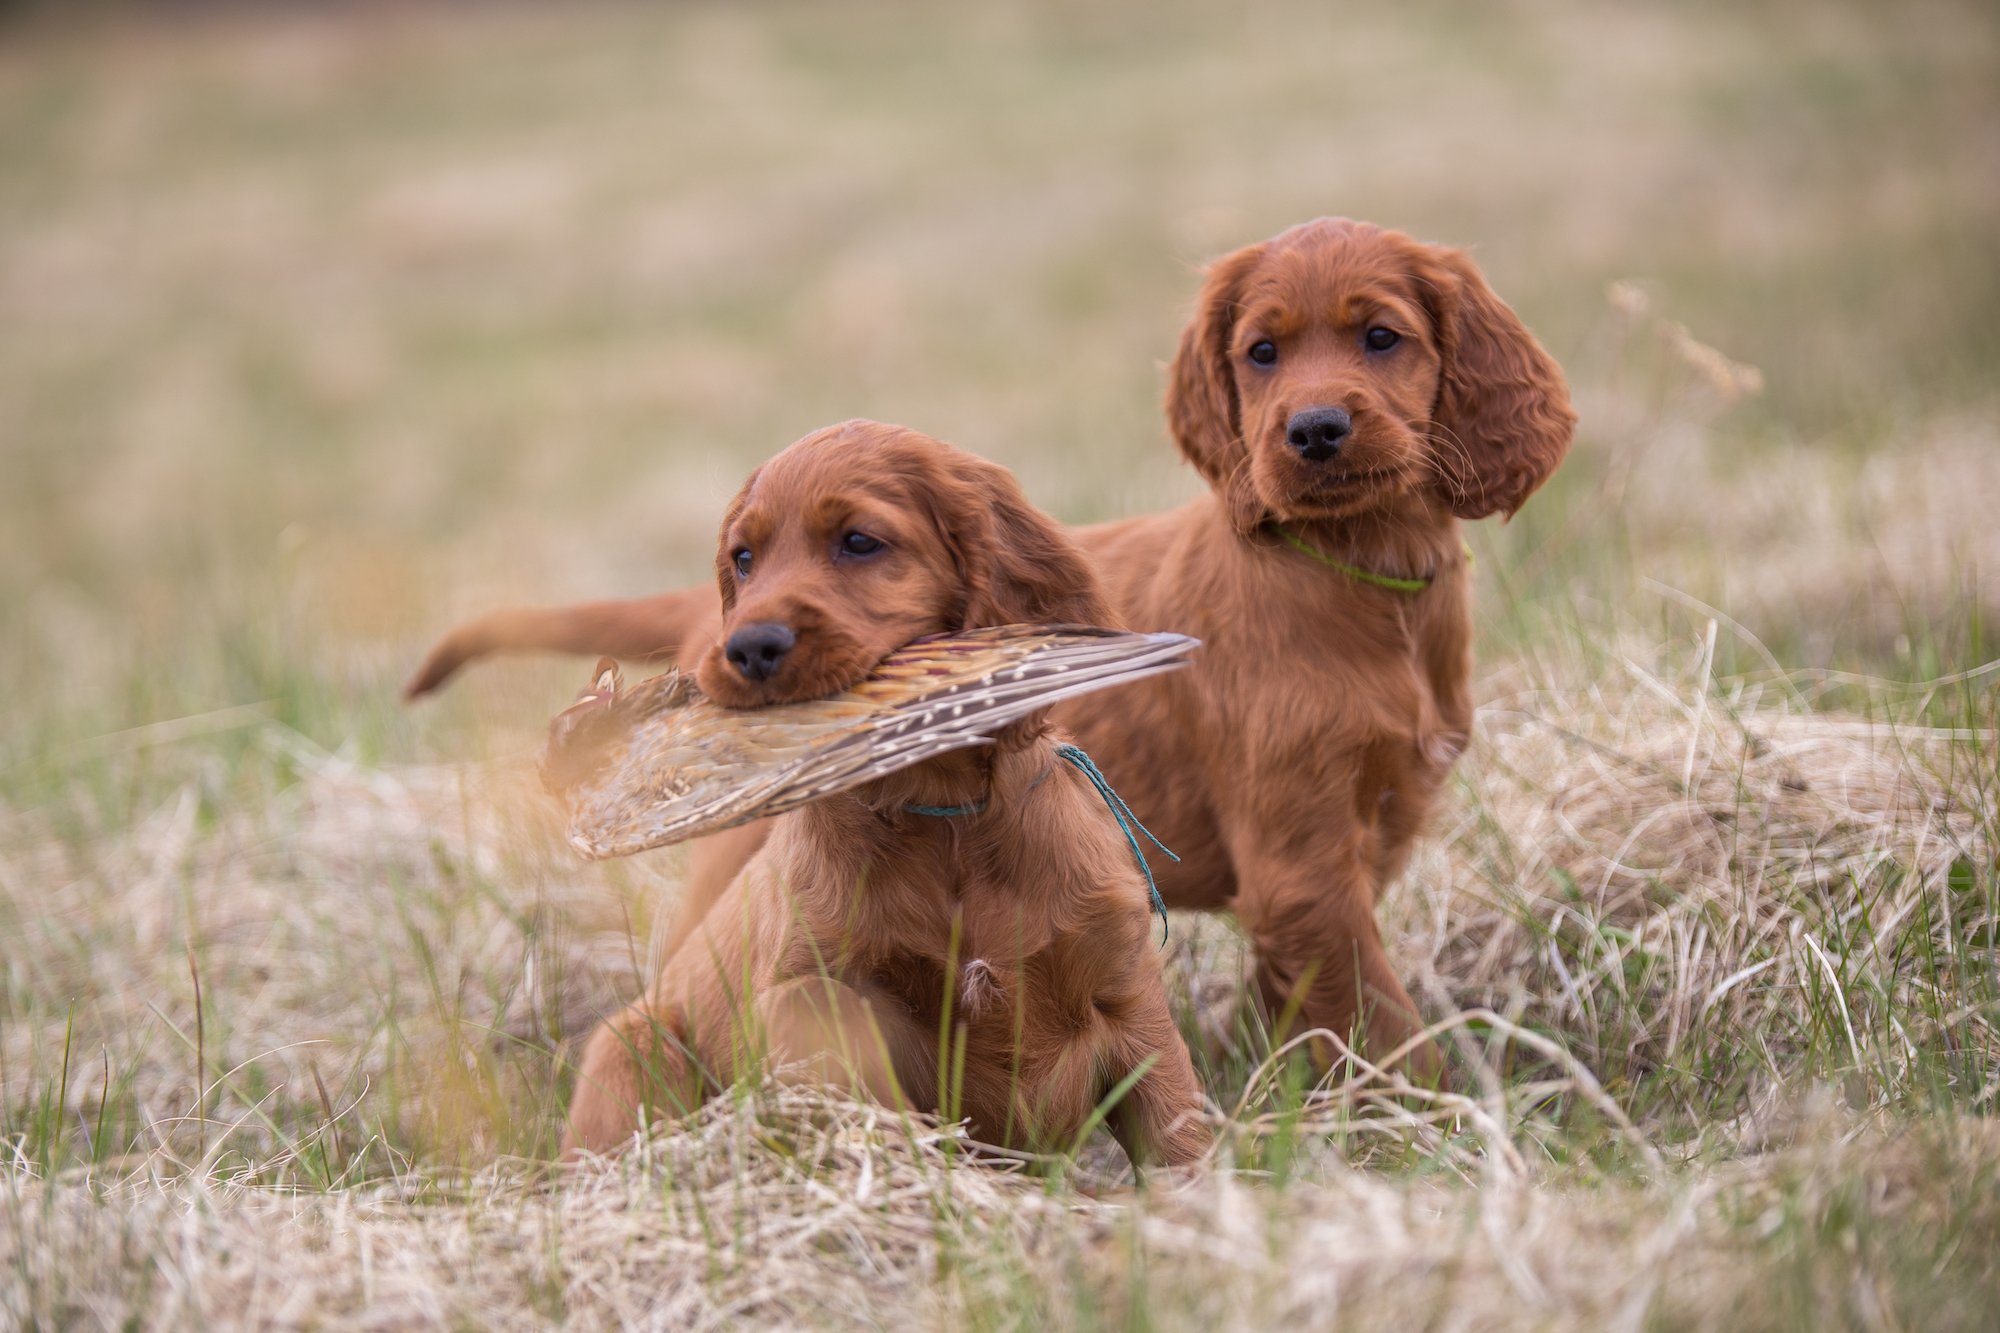 From Pup to Companion: How to Train A Hunting Dog